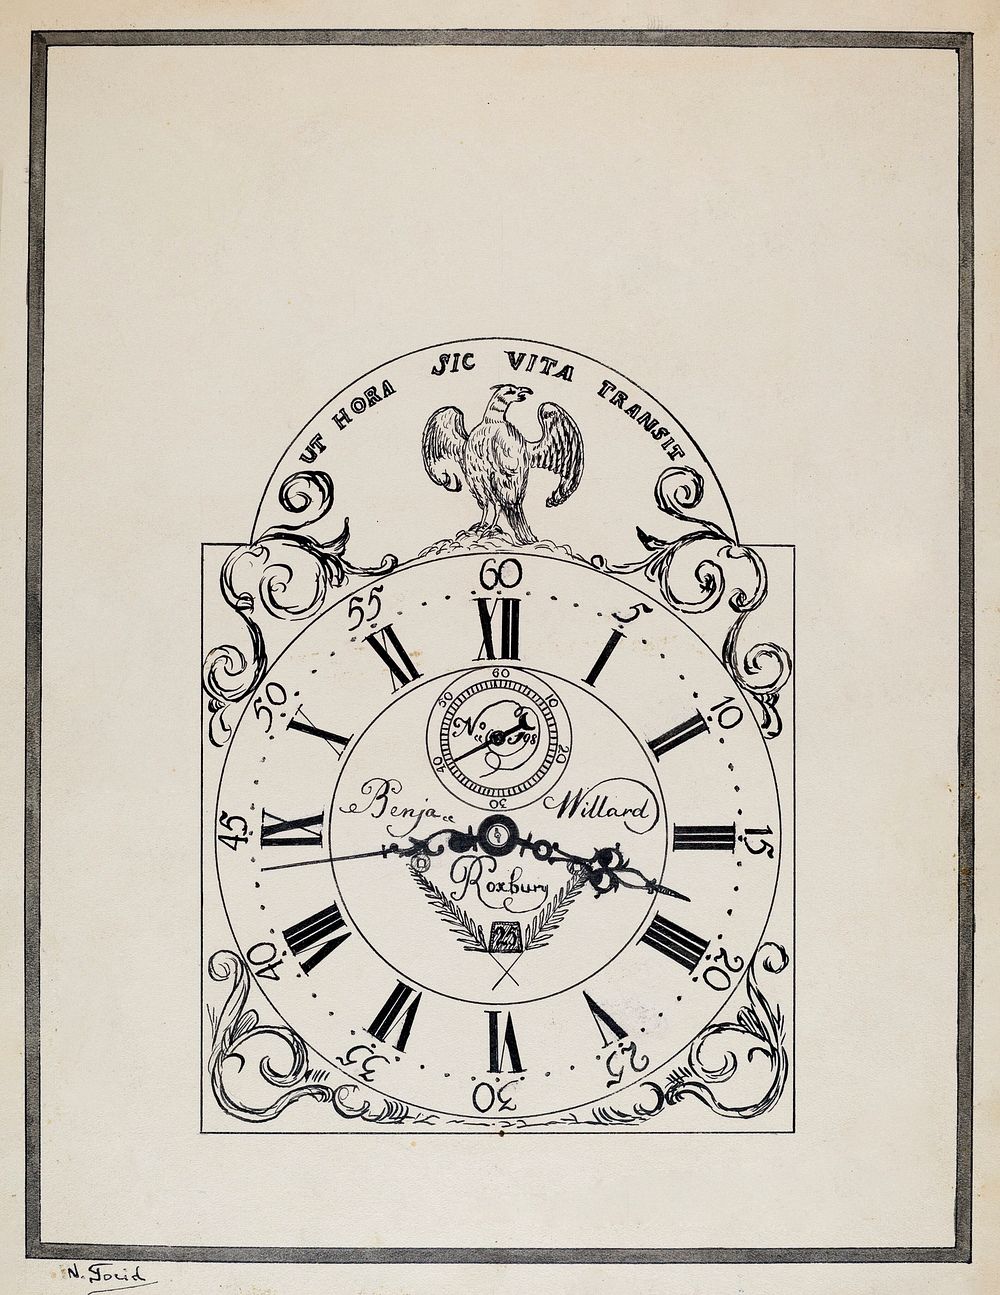 Clock (ca.1938) by Nicholas Gorid. Original from The National Gallery of Art. Digitally enhanced by rawpixel.